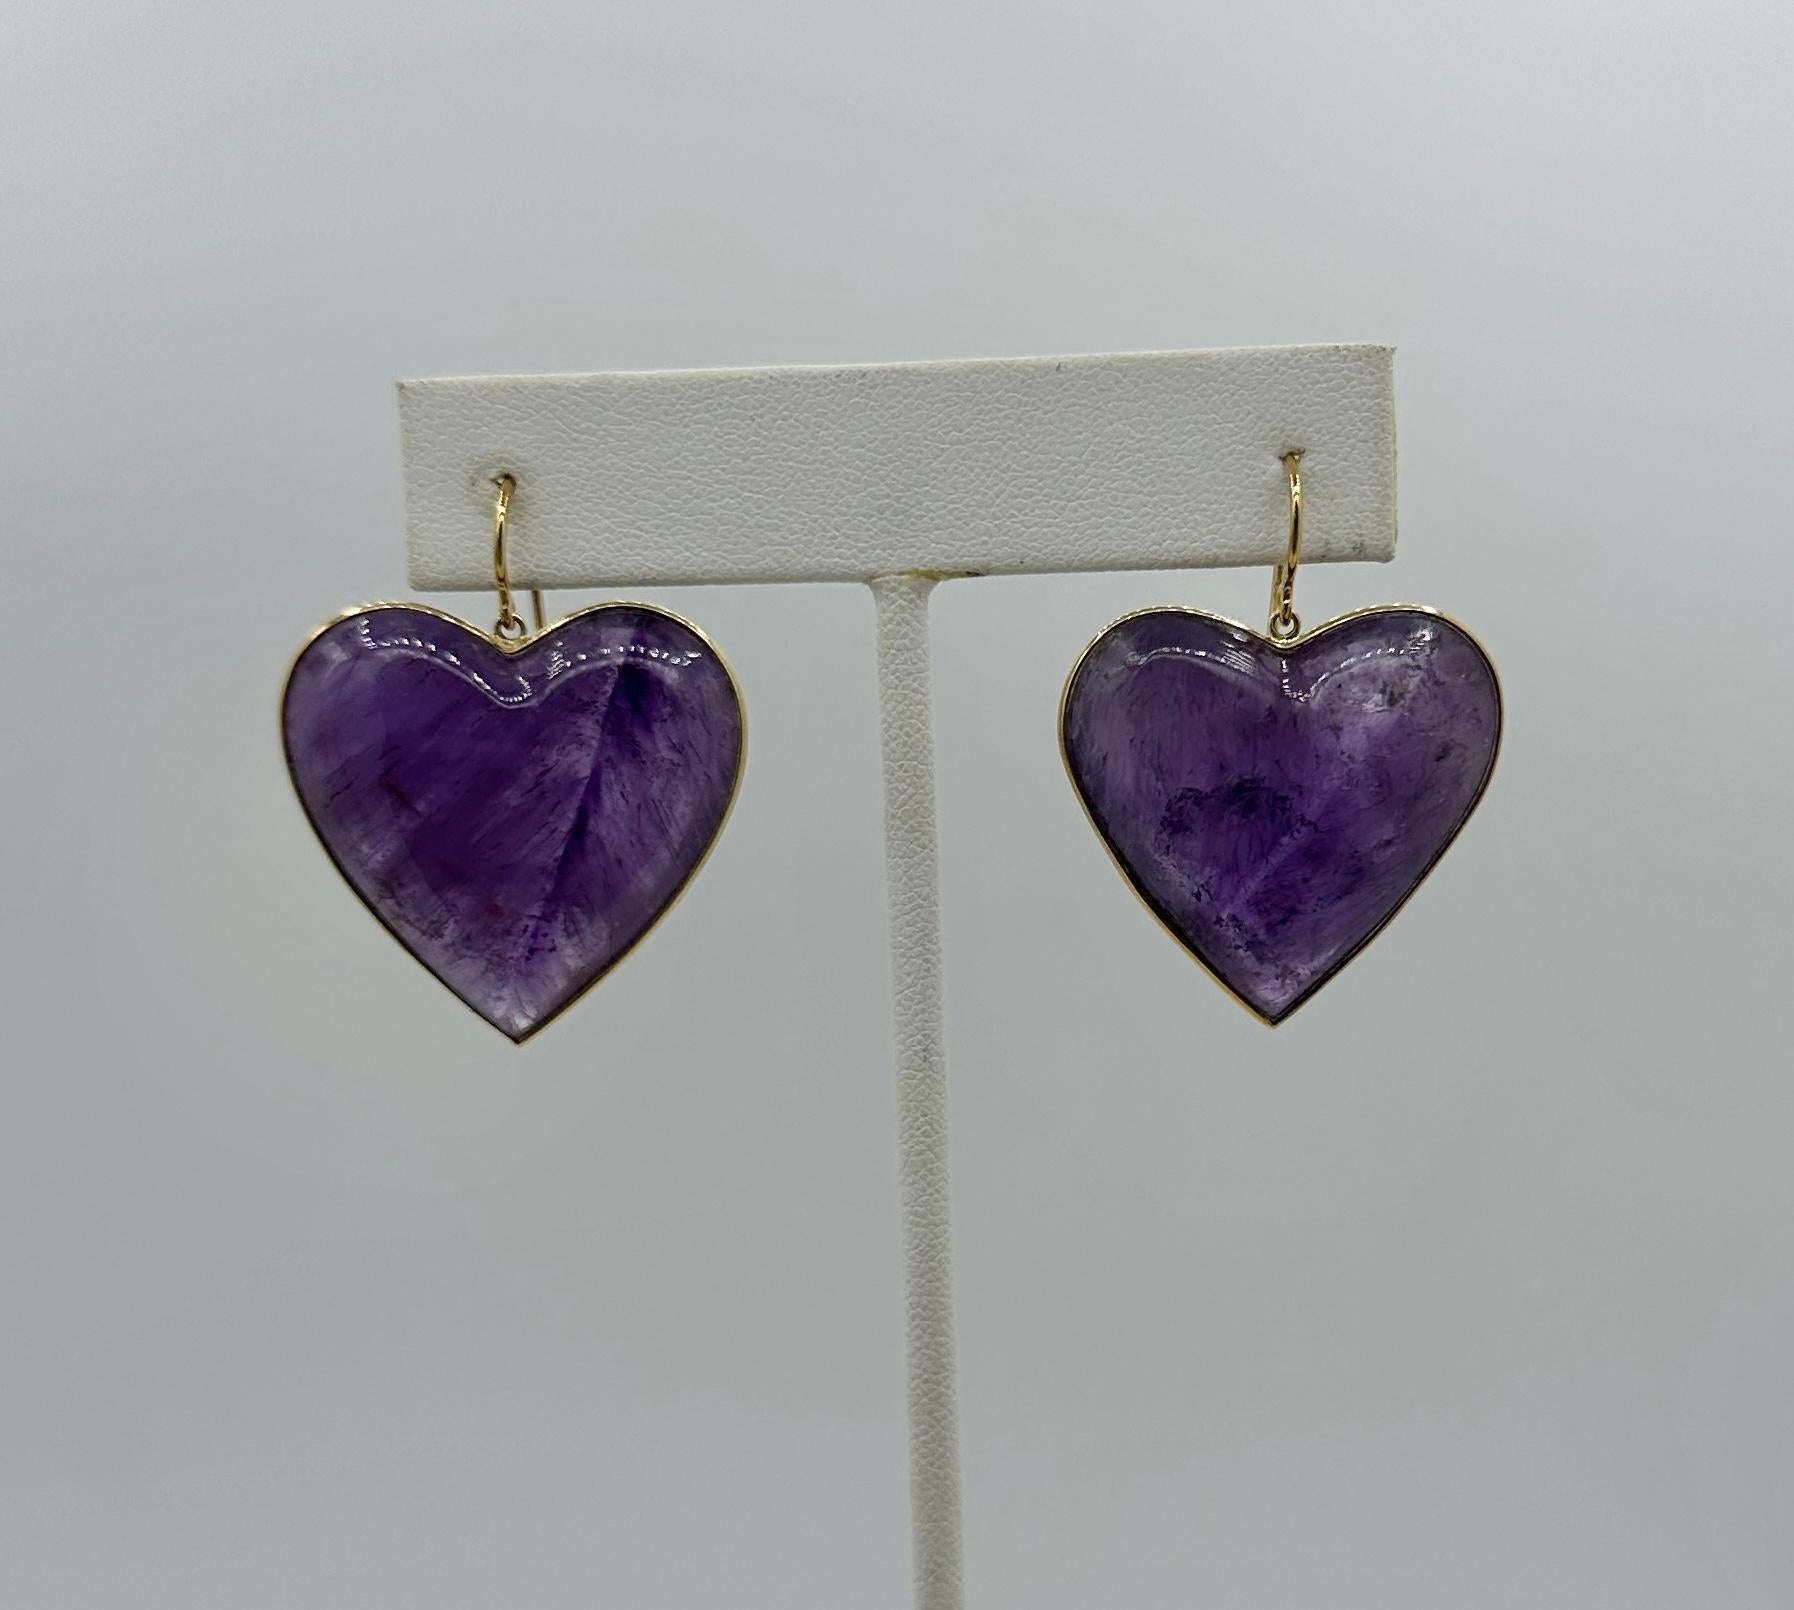 Heart Cut Amethyst Rose Quartz Heart Necklace and Earrings 14 Karat Gold Ms. Daves Estate For Sale